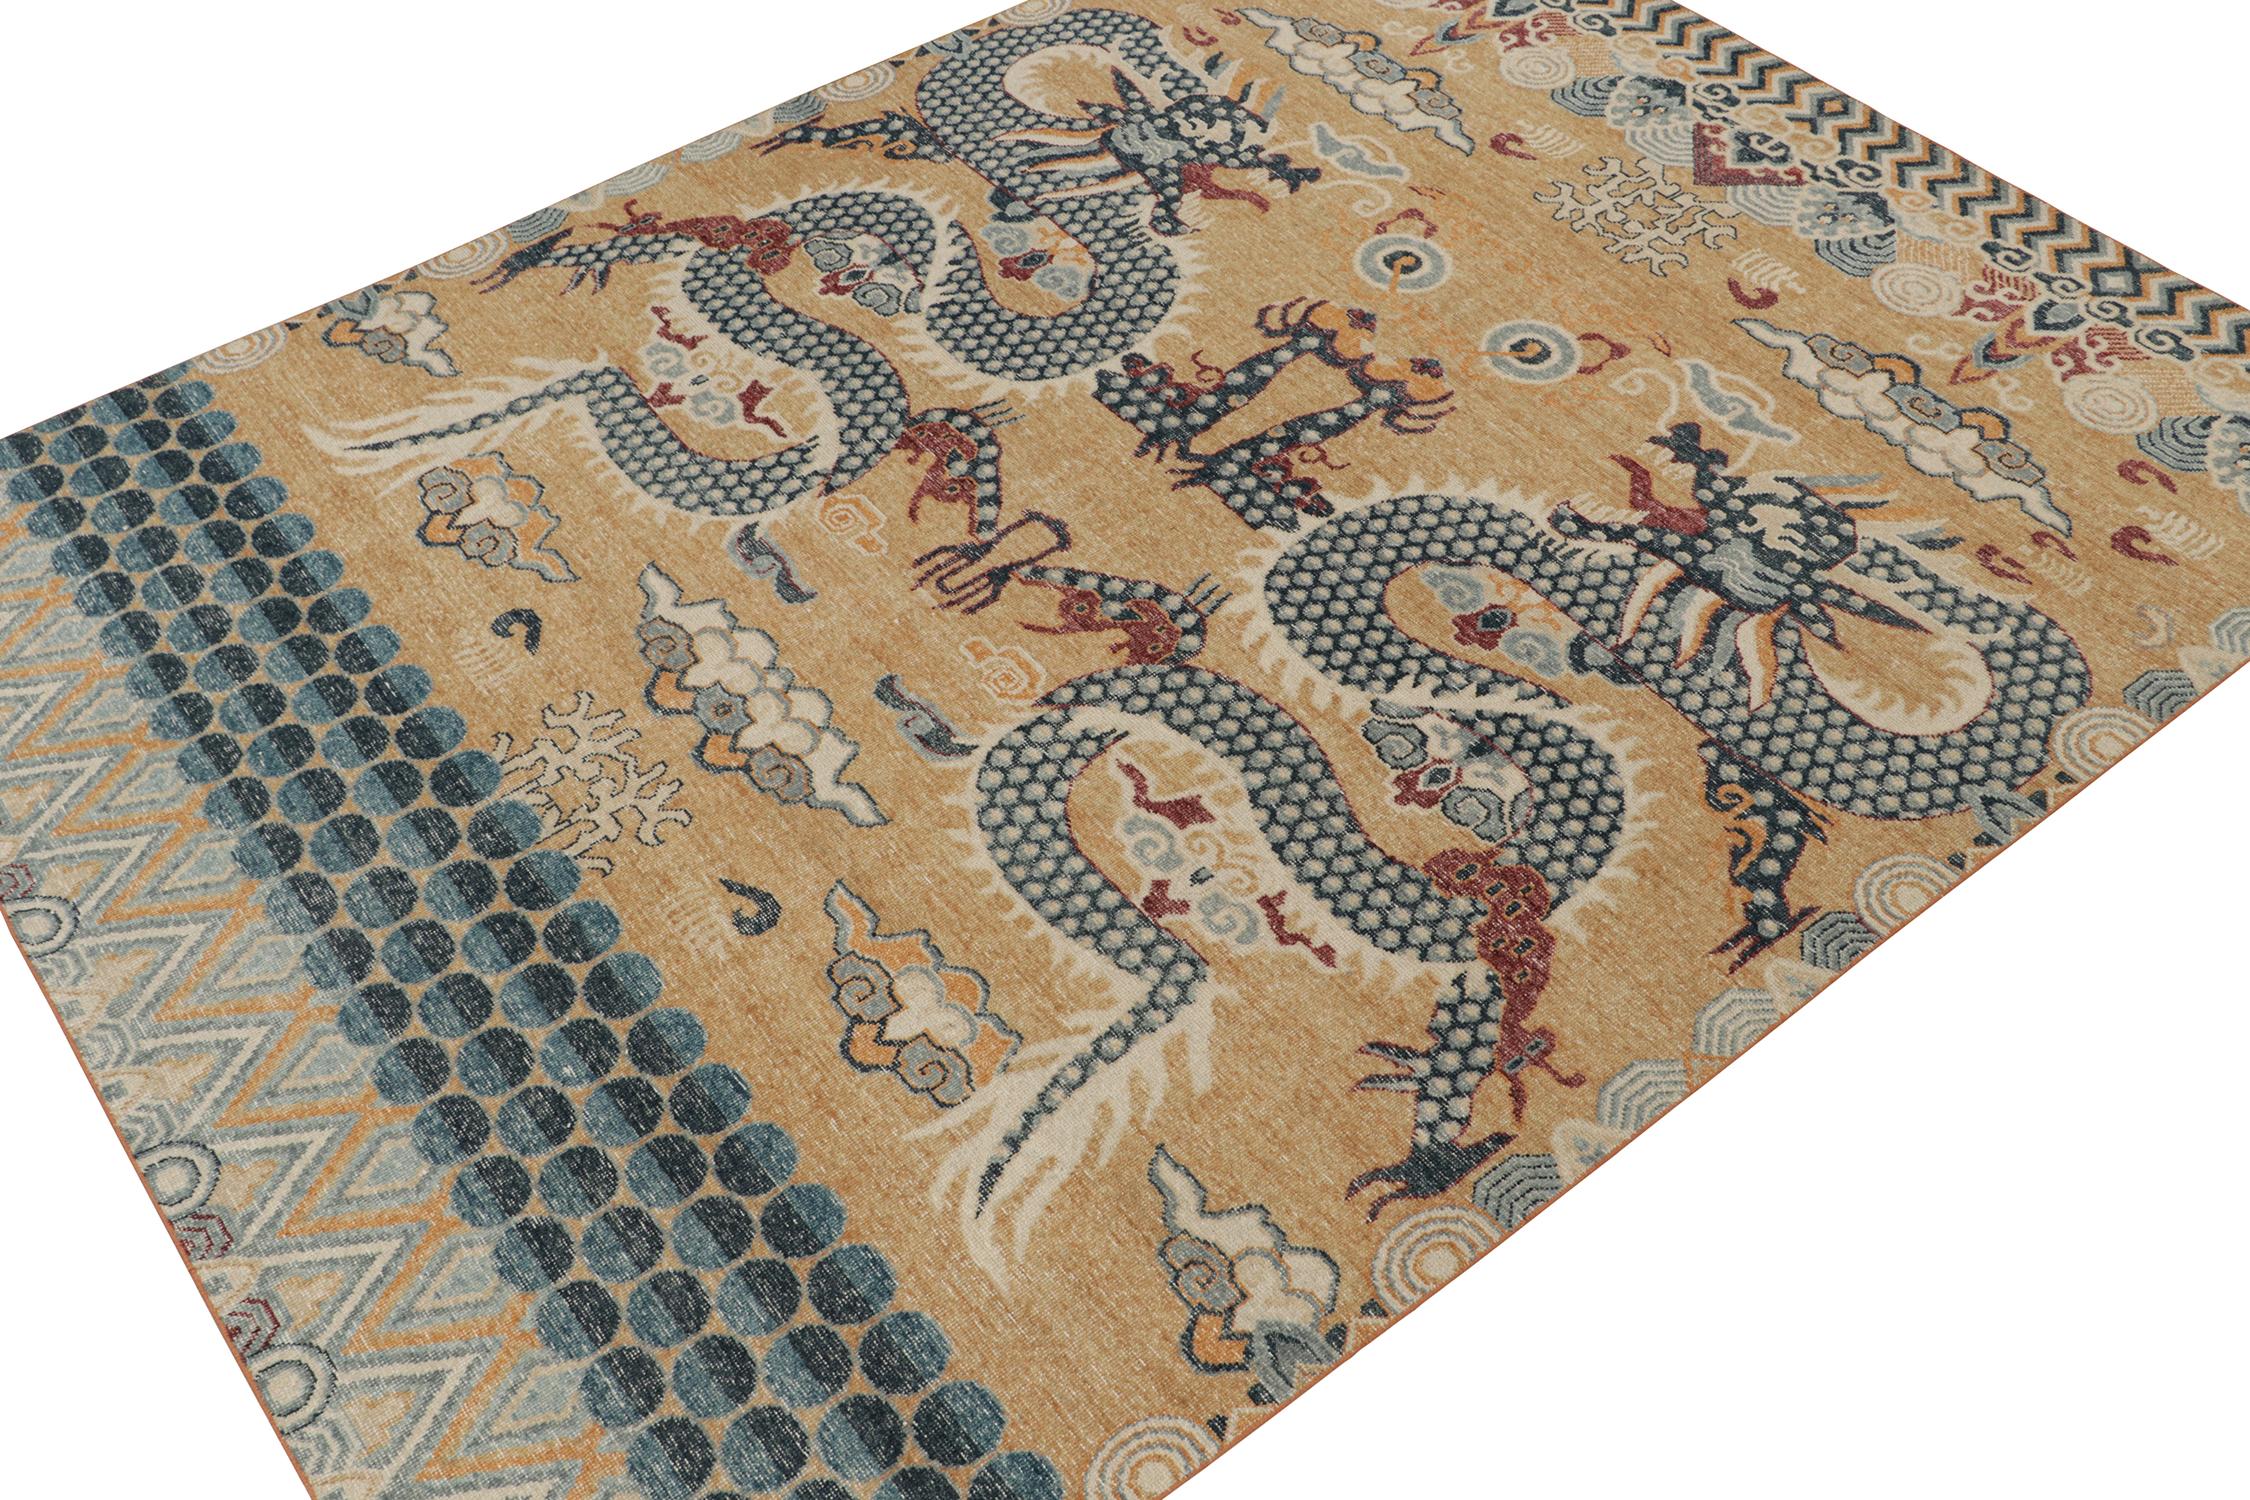 This 9x12 rug from Rug & Kilim’s Homage Collection recaptures the time-honored dragon rug in its glory and rare beauty. 

Further On the Design:

This piece is inspired by Chinese dragon rugs of the most regal, and graphic presence in antique